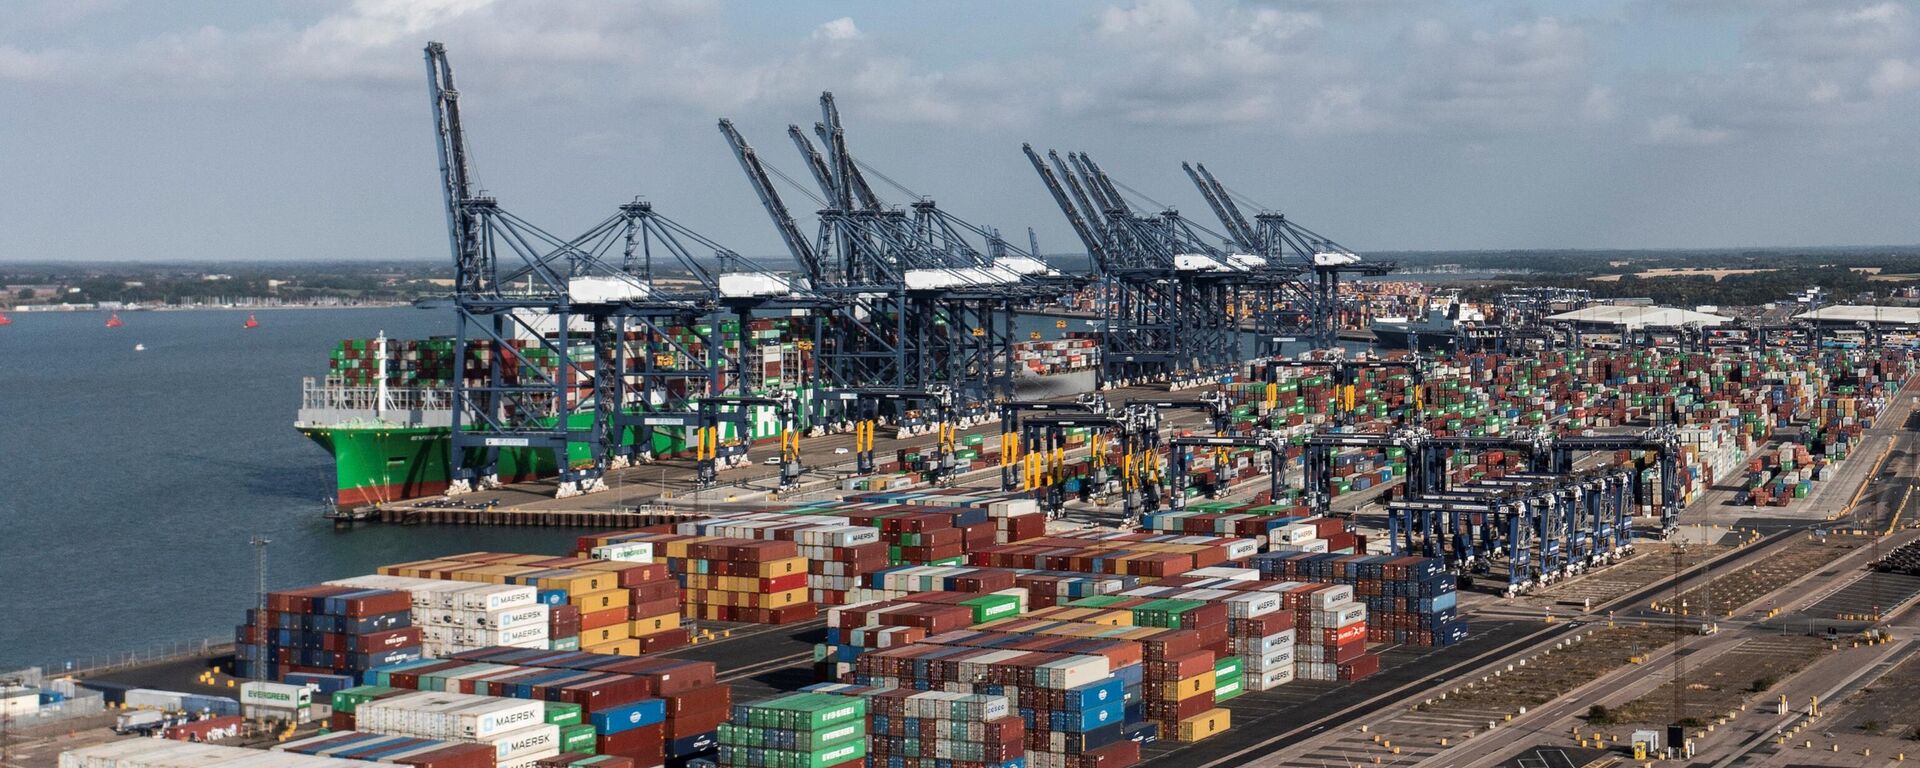 An aerial photograph taken on August 22, 2022 shows the Ever Alot container ship docked by stopped container loading cranes at the empty UK's largest freight port, in Felixstowe, during a dock workers eight-day strike over pay. - Sputnik International, 1920, 22.08.2022